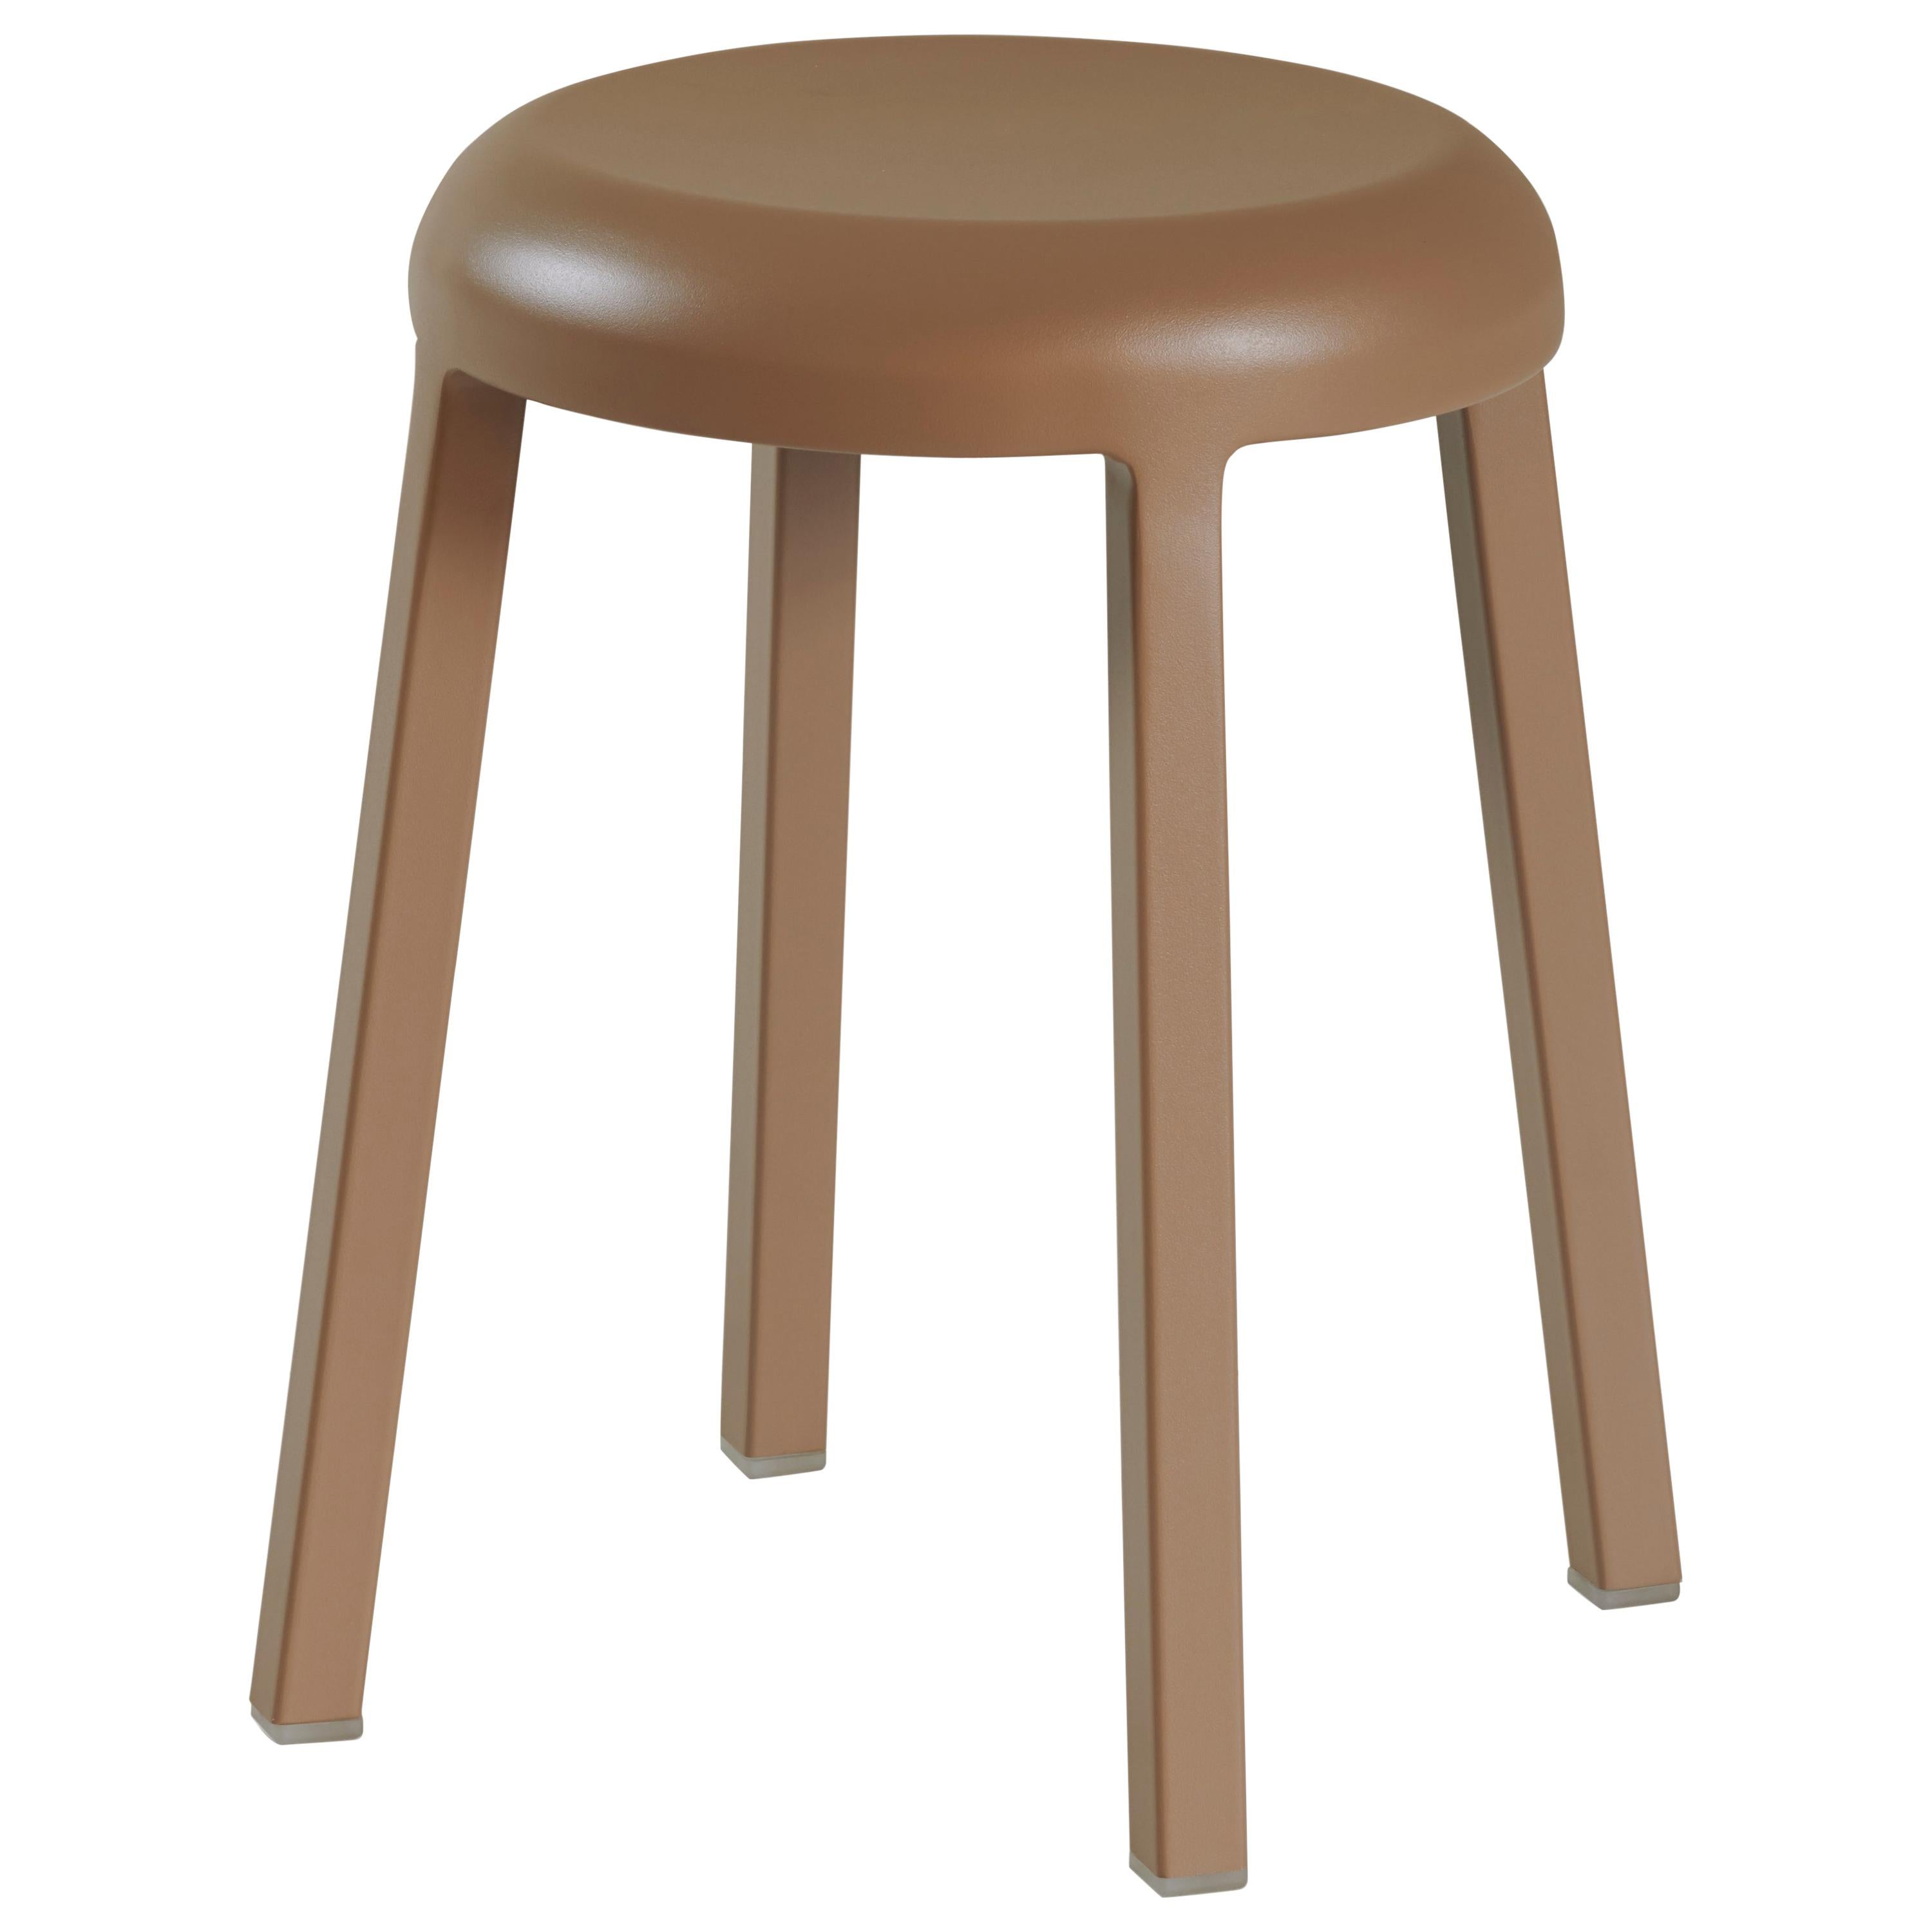 Emeco ZA Small Stool in Sweater Brown Finish by Naoto Fukasawa For Sale